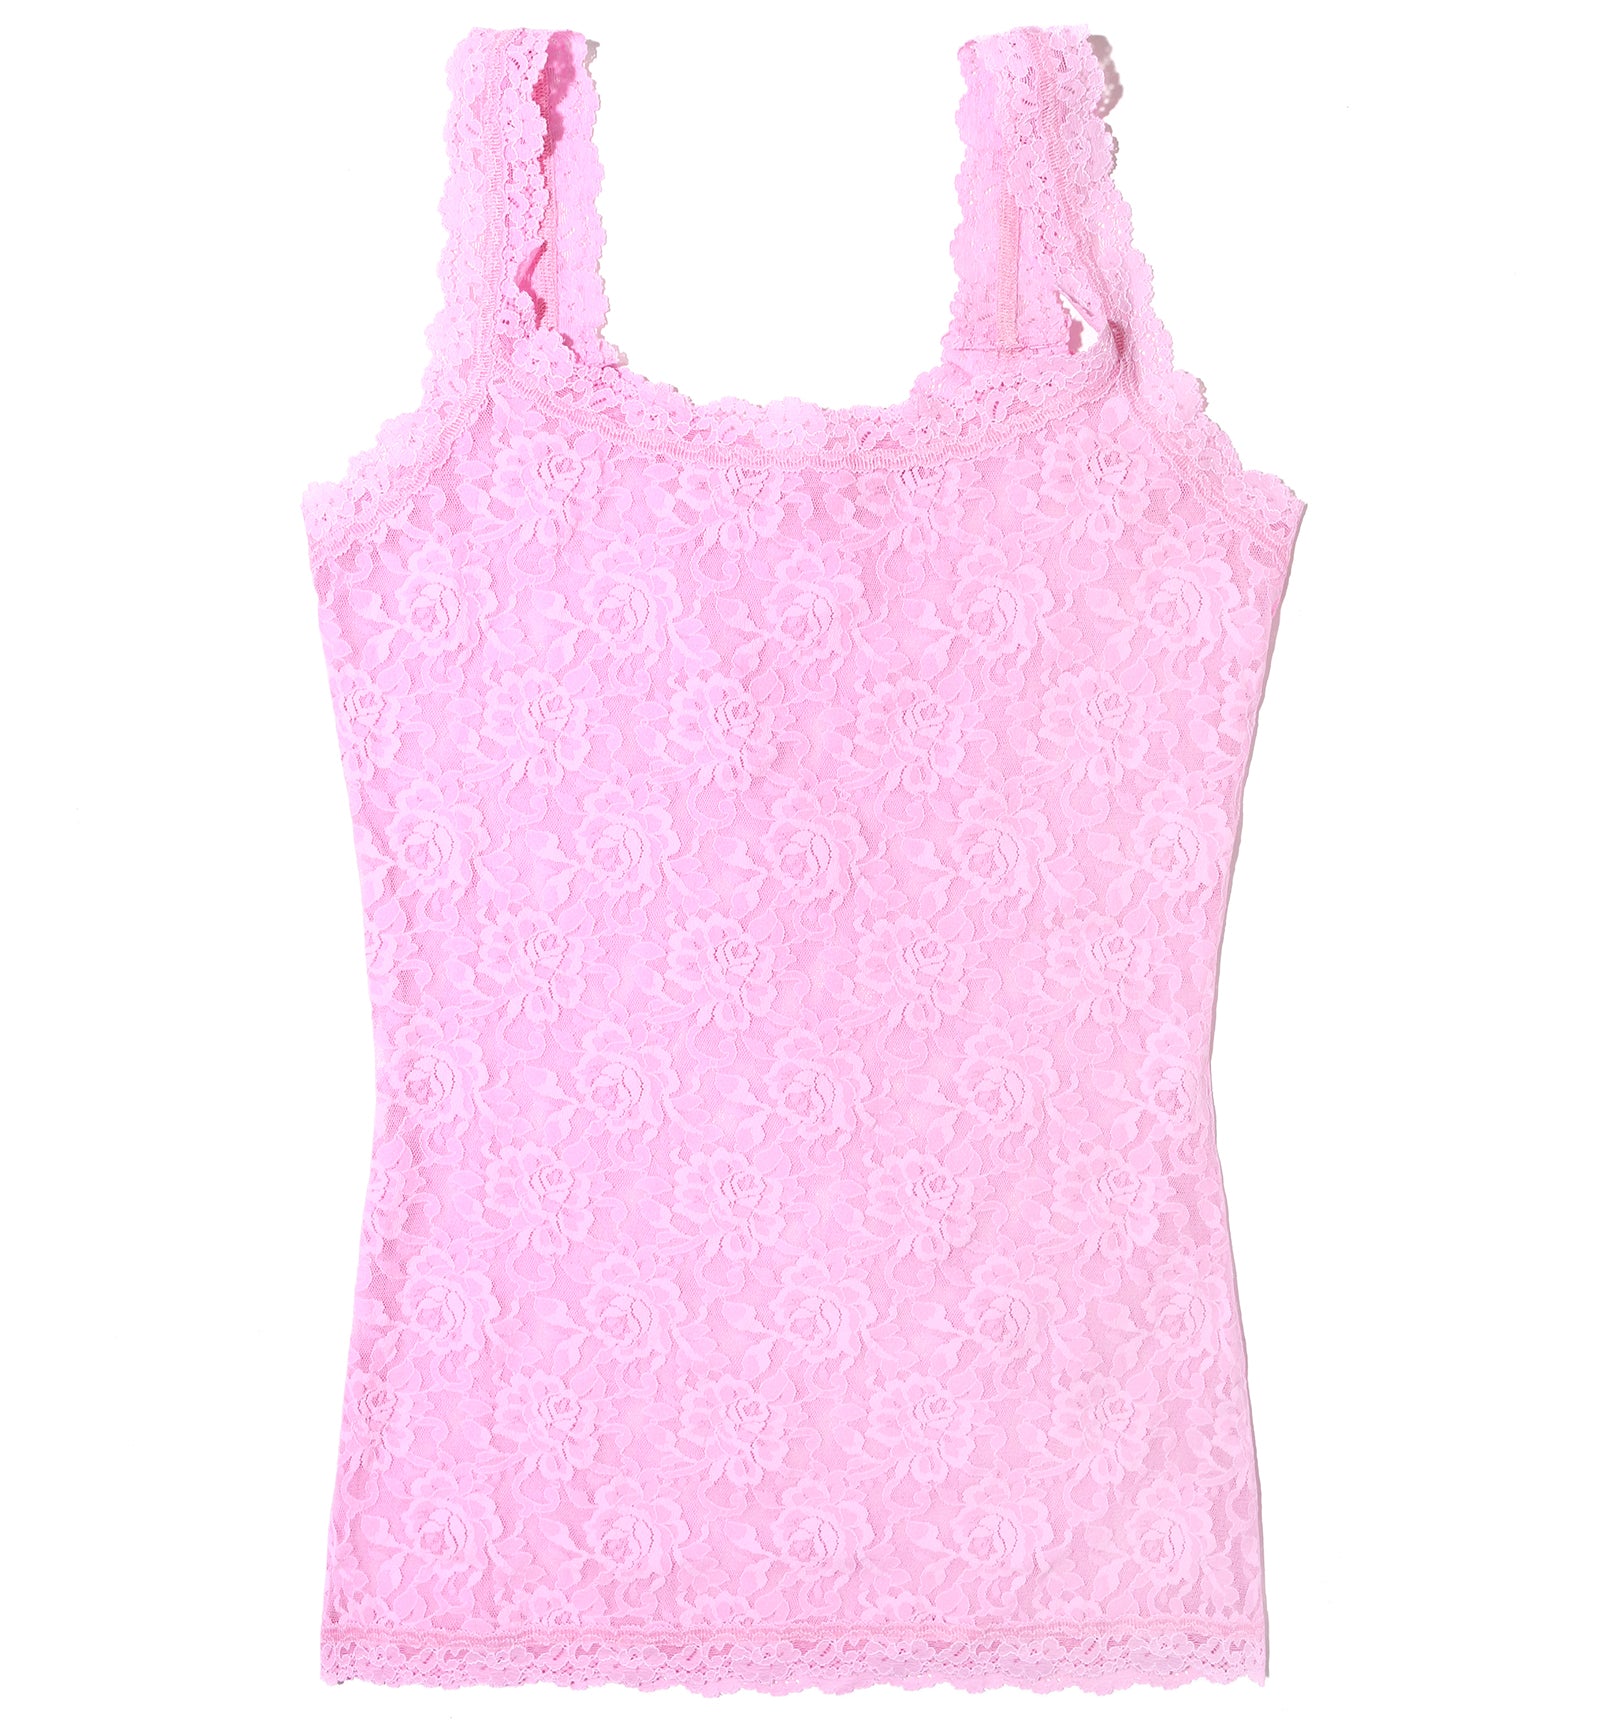 Hanky Panky Signature Lace Unlined Camisole (1390LP),XS,Cotton Candy - Cotton Candy,XS